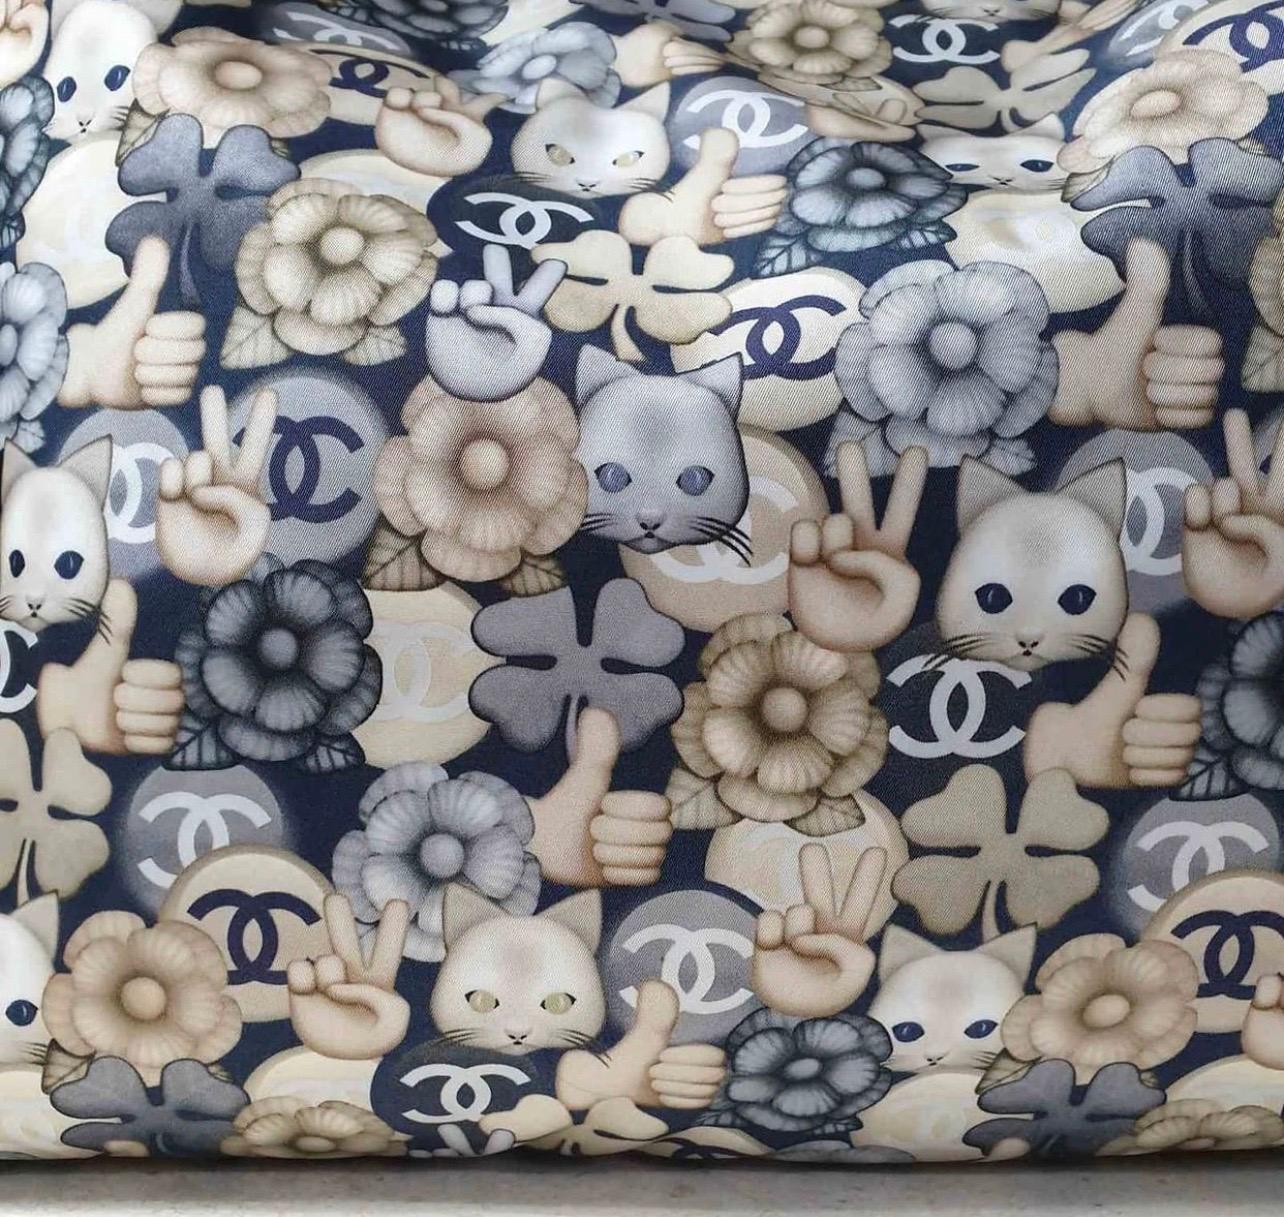 Chanel Nylon Cat Emoticon Tote from the 16K Collection.

Crafted in Navy Gold nylon quilted fabric.

This bag features cat and emoji artwork and metallic gold leather top handles.

Lined in navy nylon.

Wallet inside was lost.

Condition is very